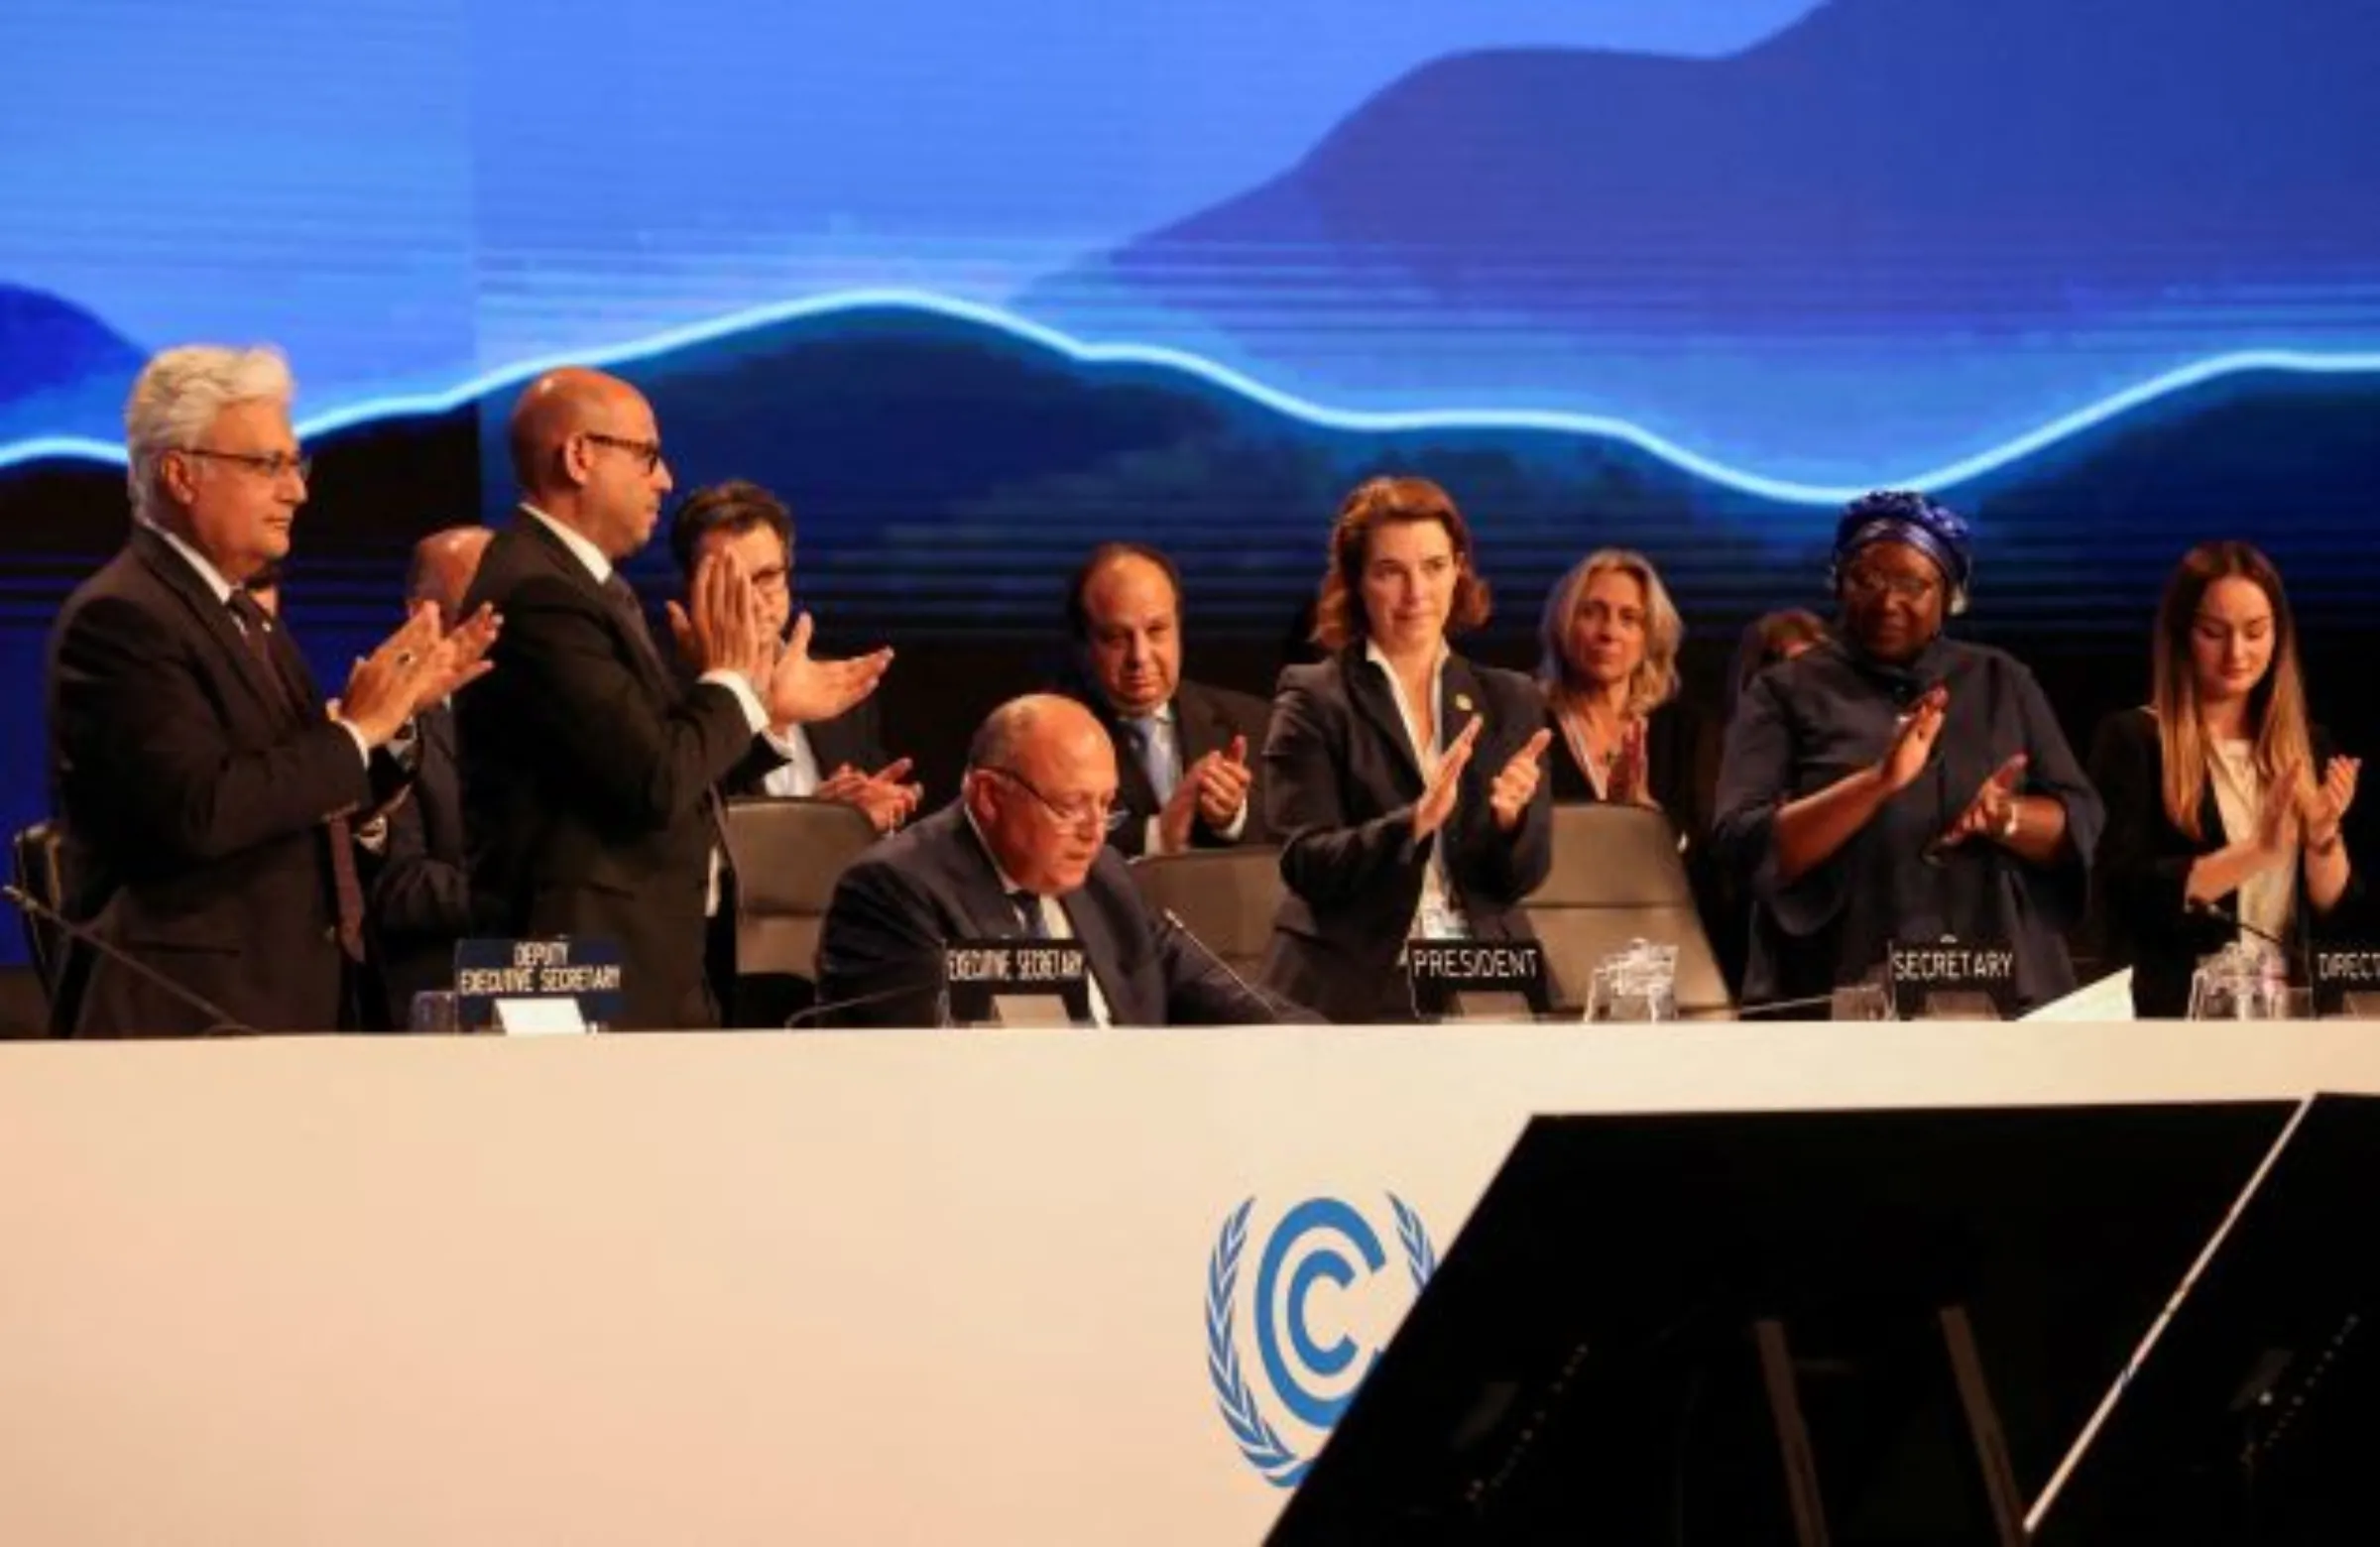 Delegates applaud as COP27 President Sameh Shoukry delivers a statement during the closing plenary at the COP27 climate summit in Red Sea resort of Sharm el-Sheikh, Egypt, November 20, 2022. REUTERS/Mohamed Abd El Ghany